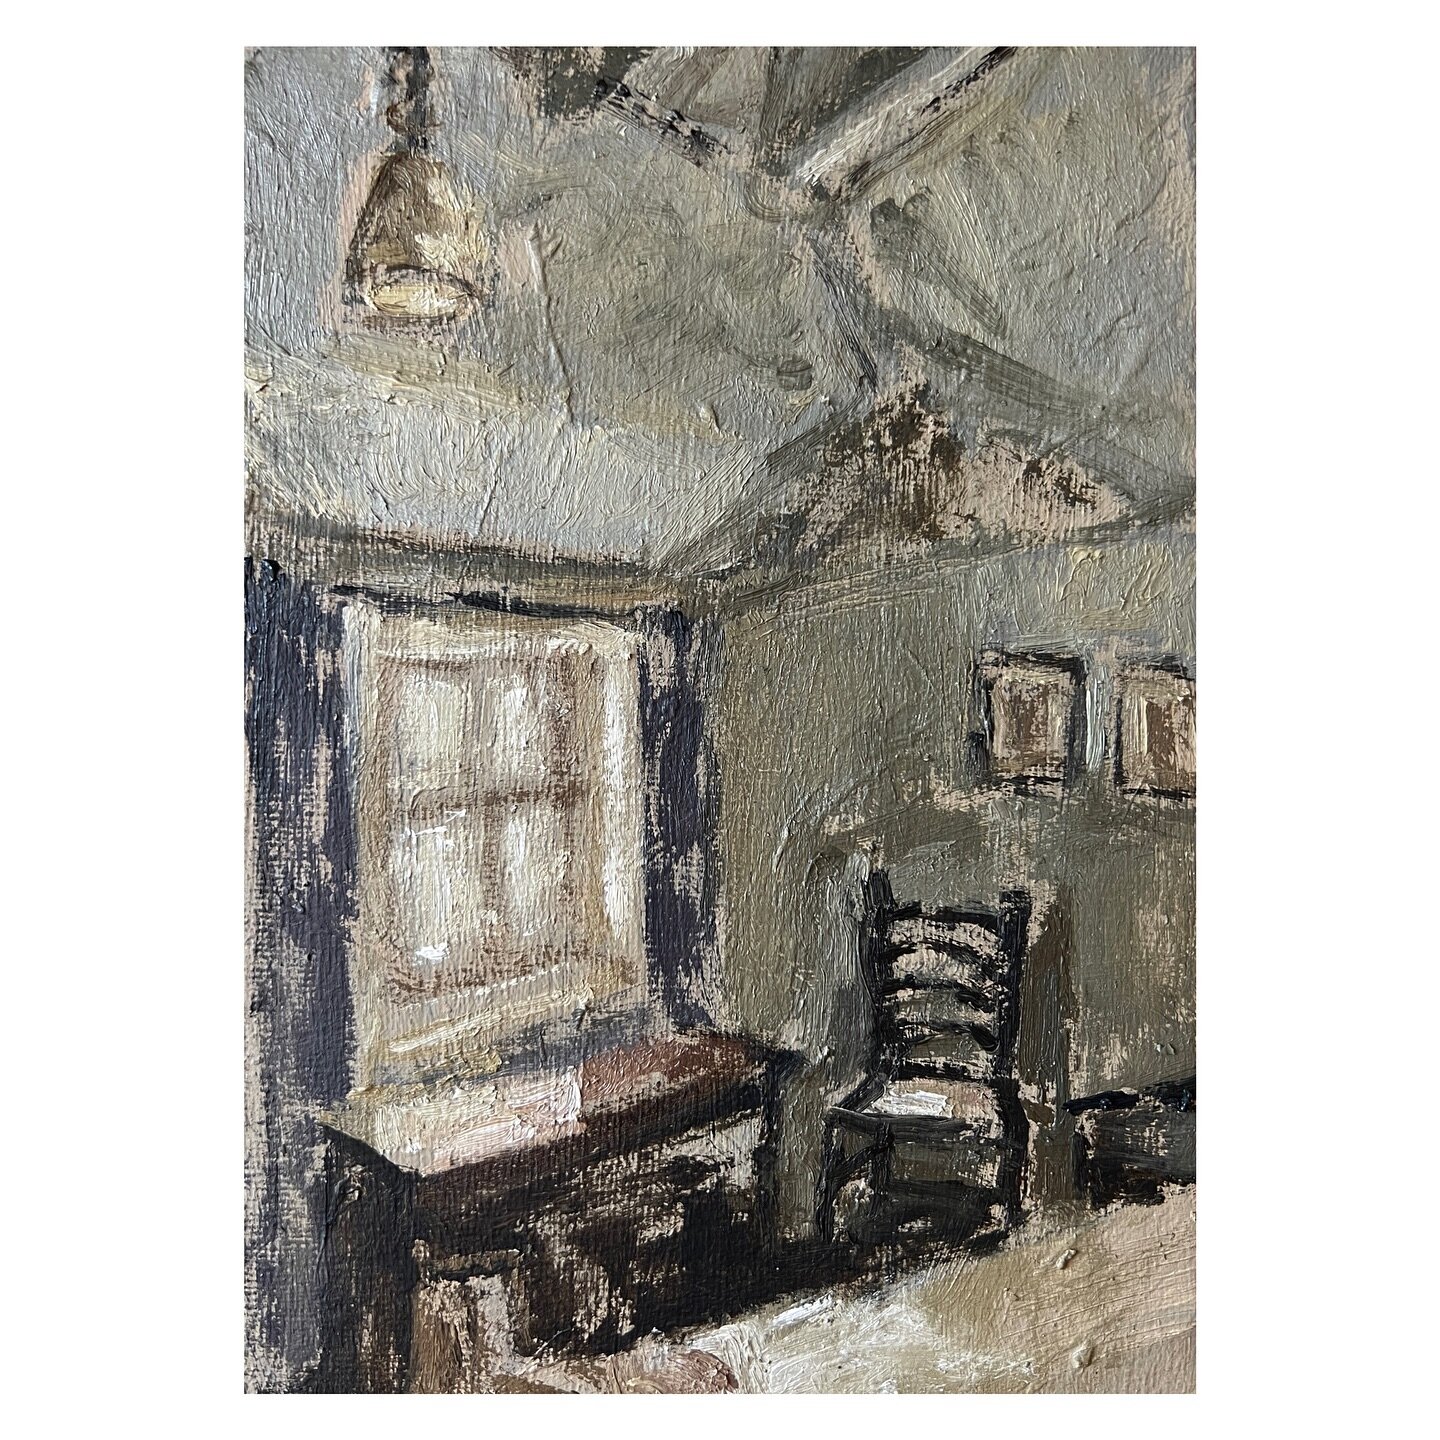 Another interior from my stay on Skye back in 2018, the cottage we stayed in was so peaceful and thoughtfully decorated.
&lsquo;Tigh Nighean Bhan, bedroom corner&rsquo;
Oil on canvas panel 
13 x 18 cm
 
#scottishbordersartist #scottishbordersart #sky